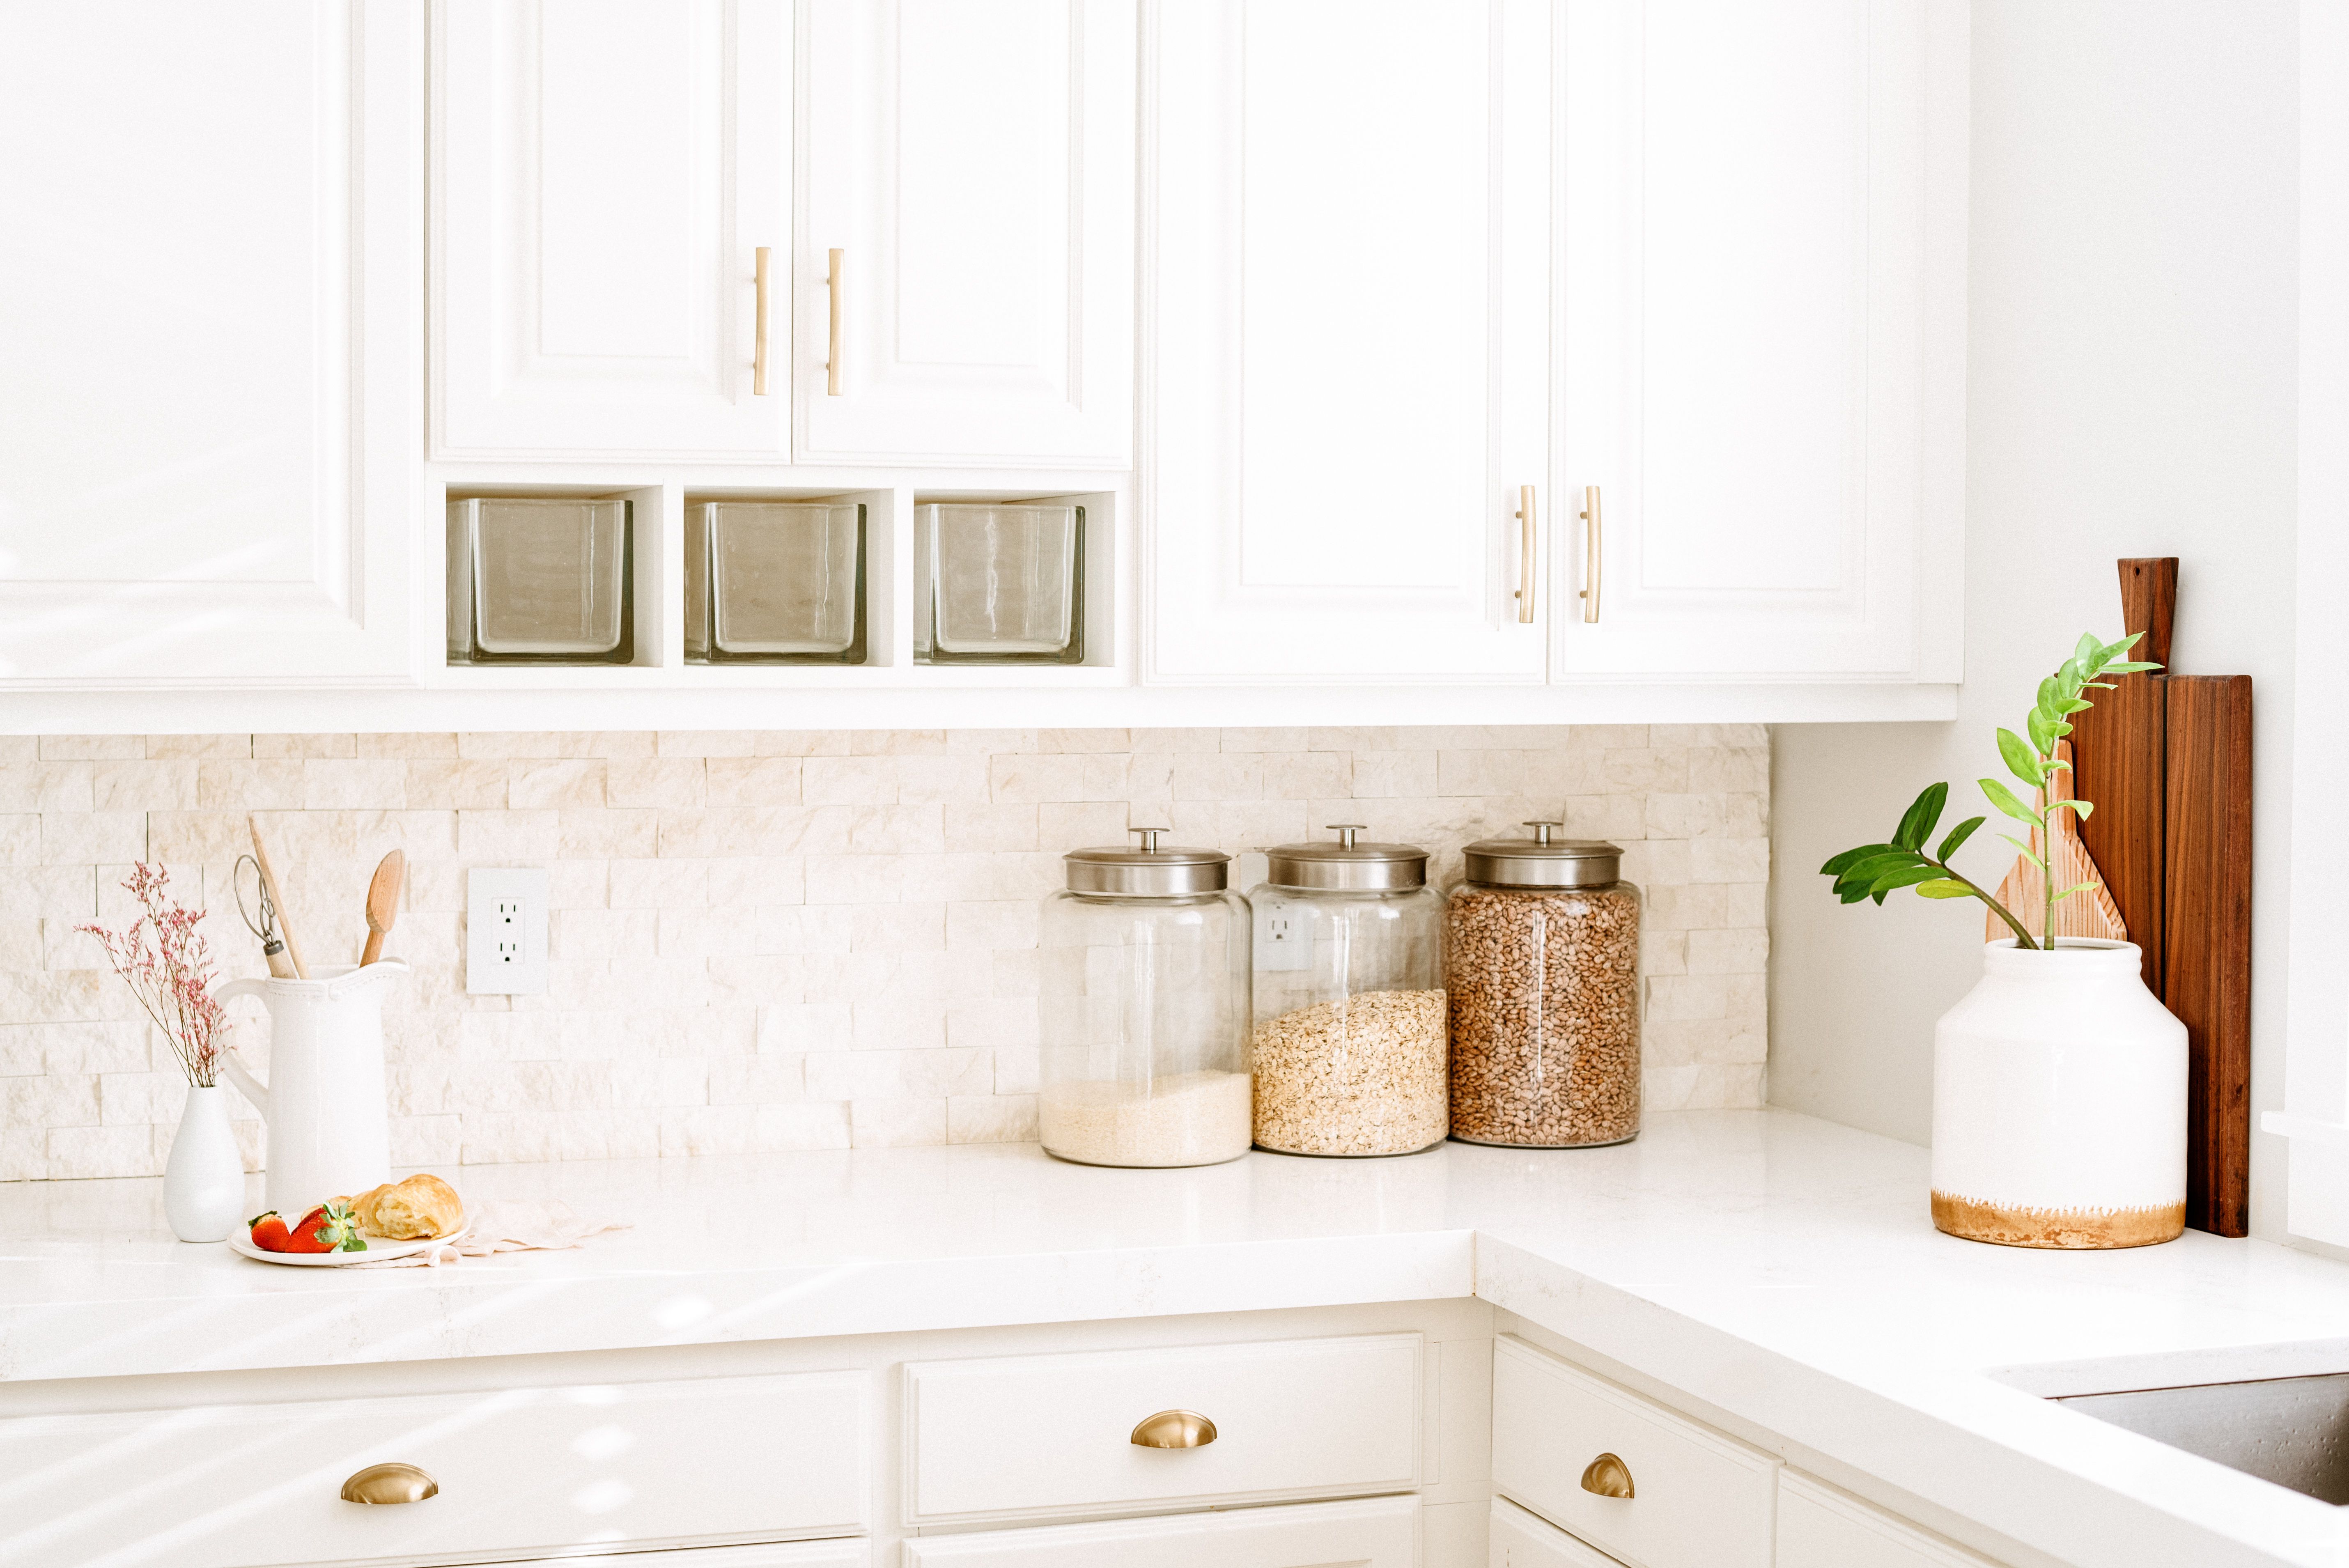 5 Essential Tips for Keeping Kitchen Counters Organized